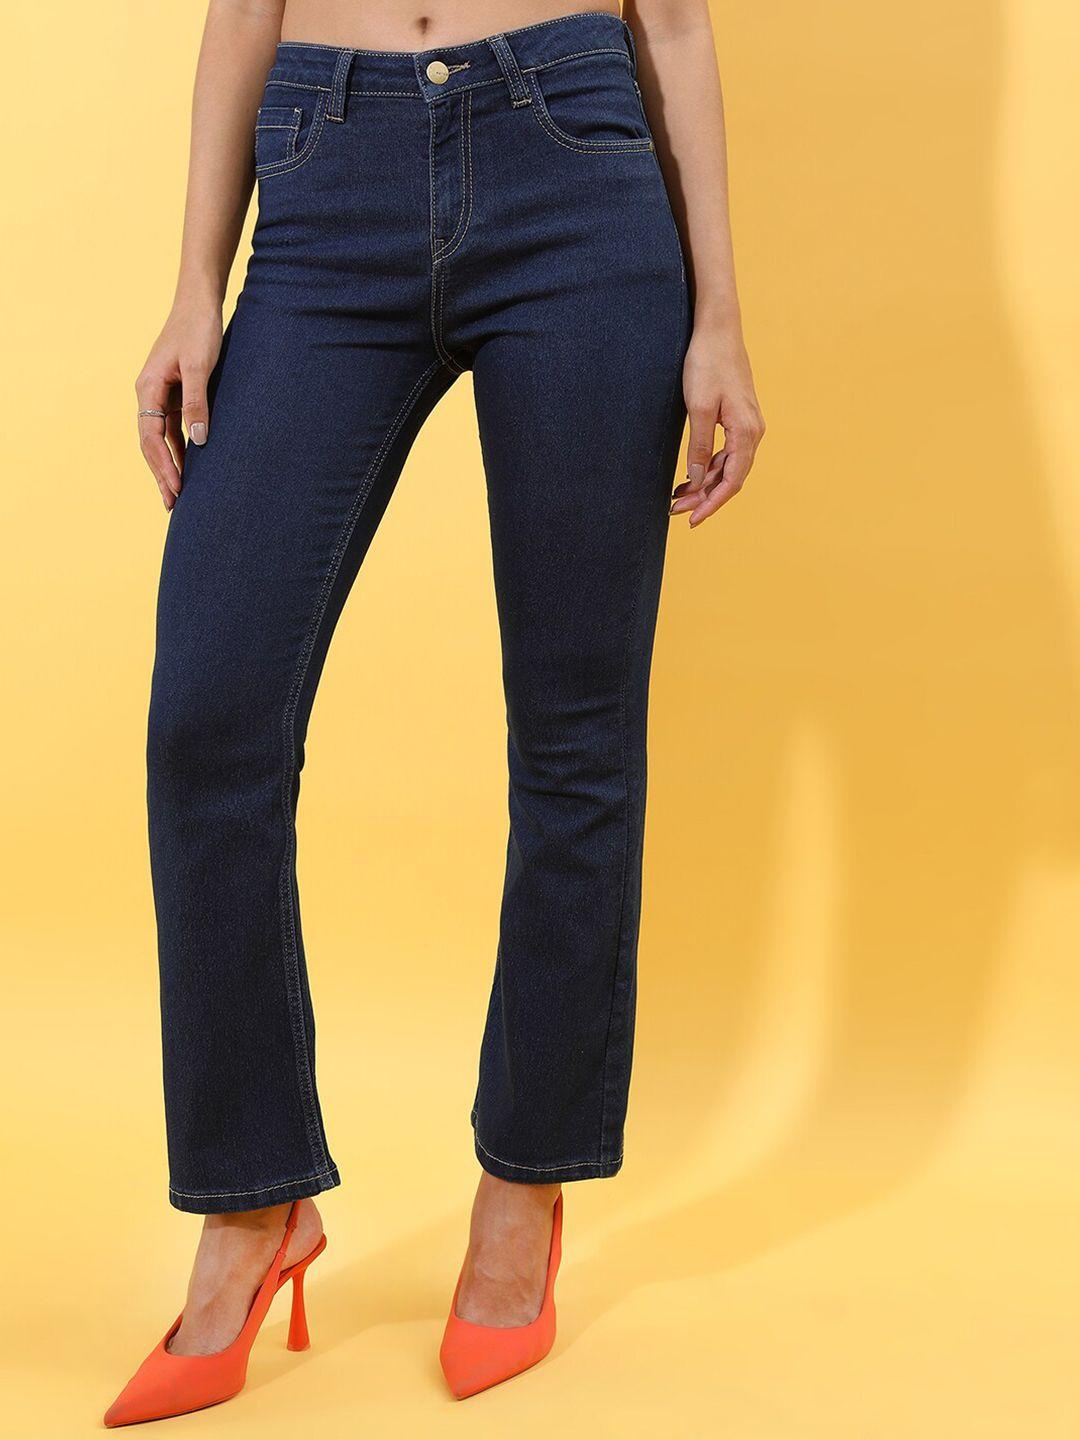 ketch-women-clean-look-mid-rise-bootcut-jeans